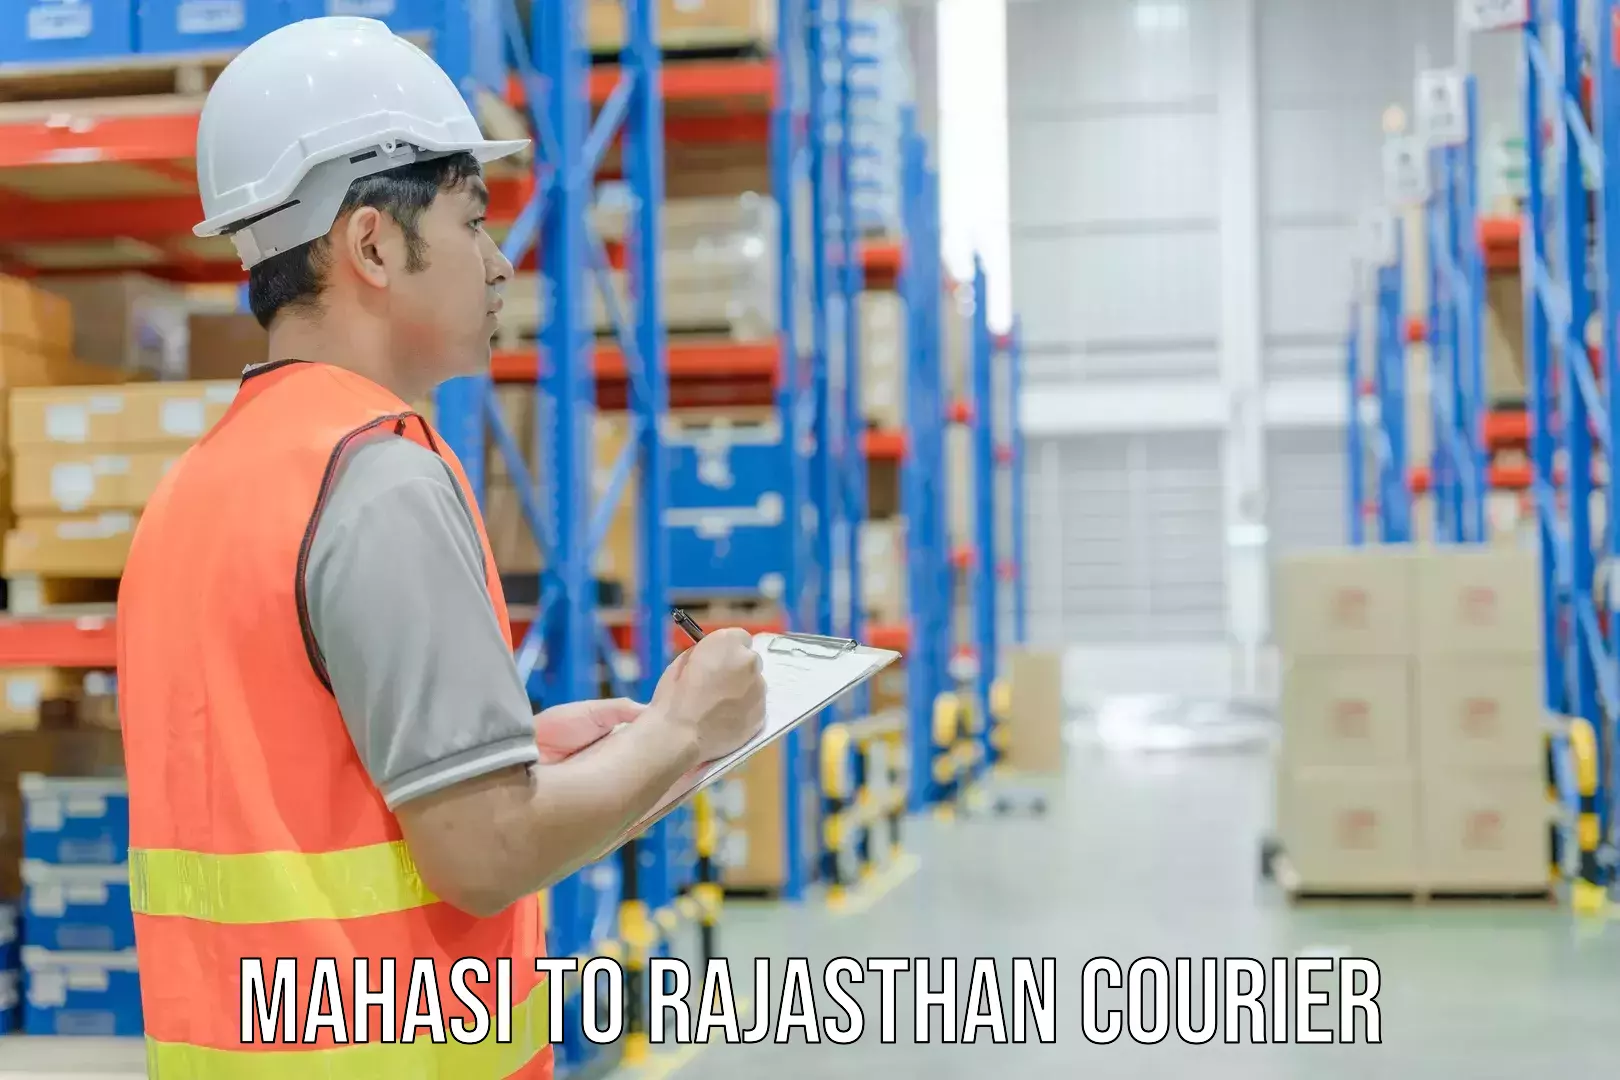 International courier networks Mahasi to Rajasthan